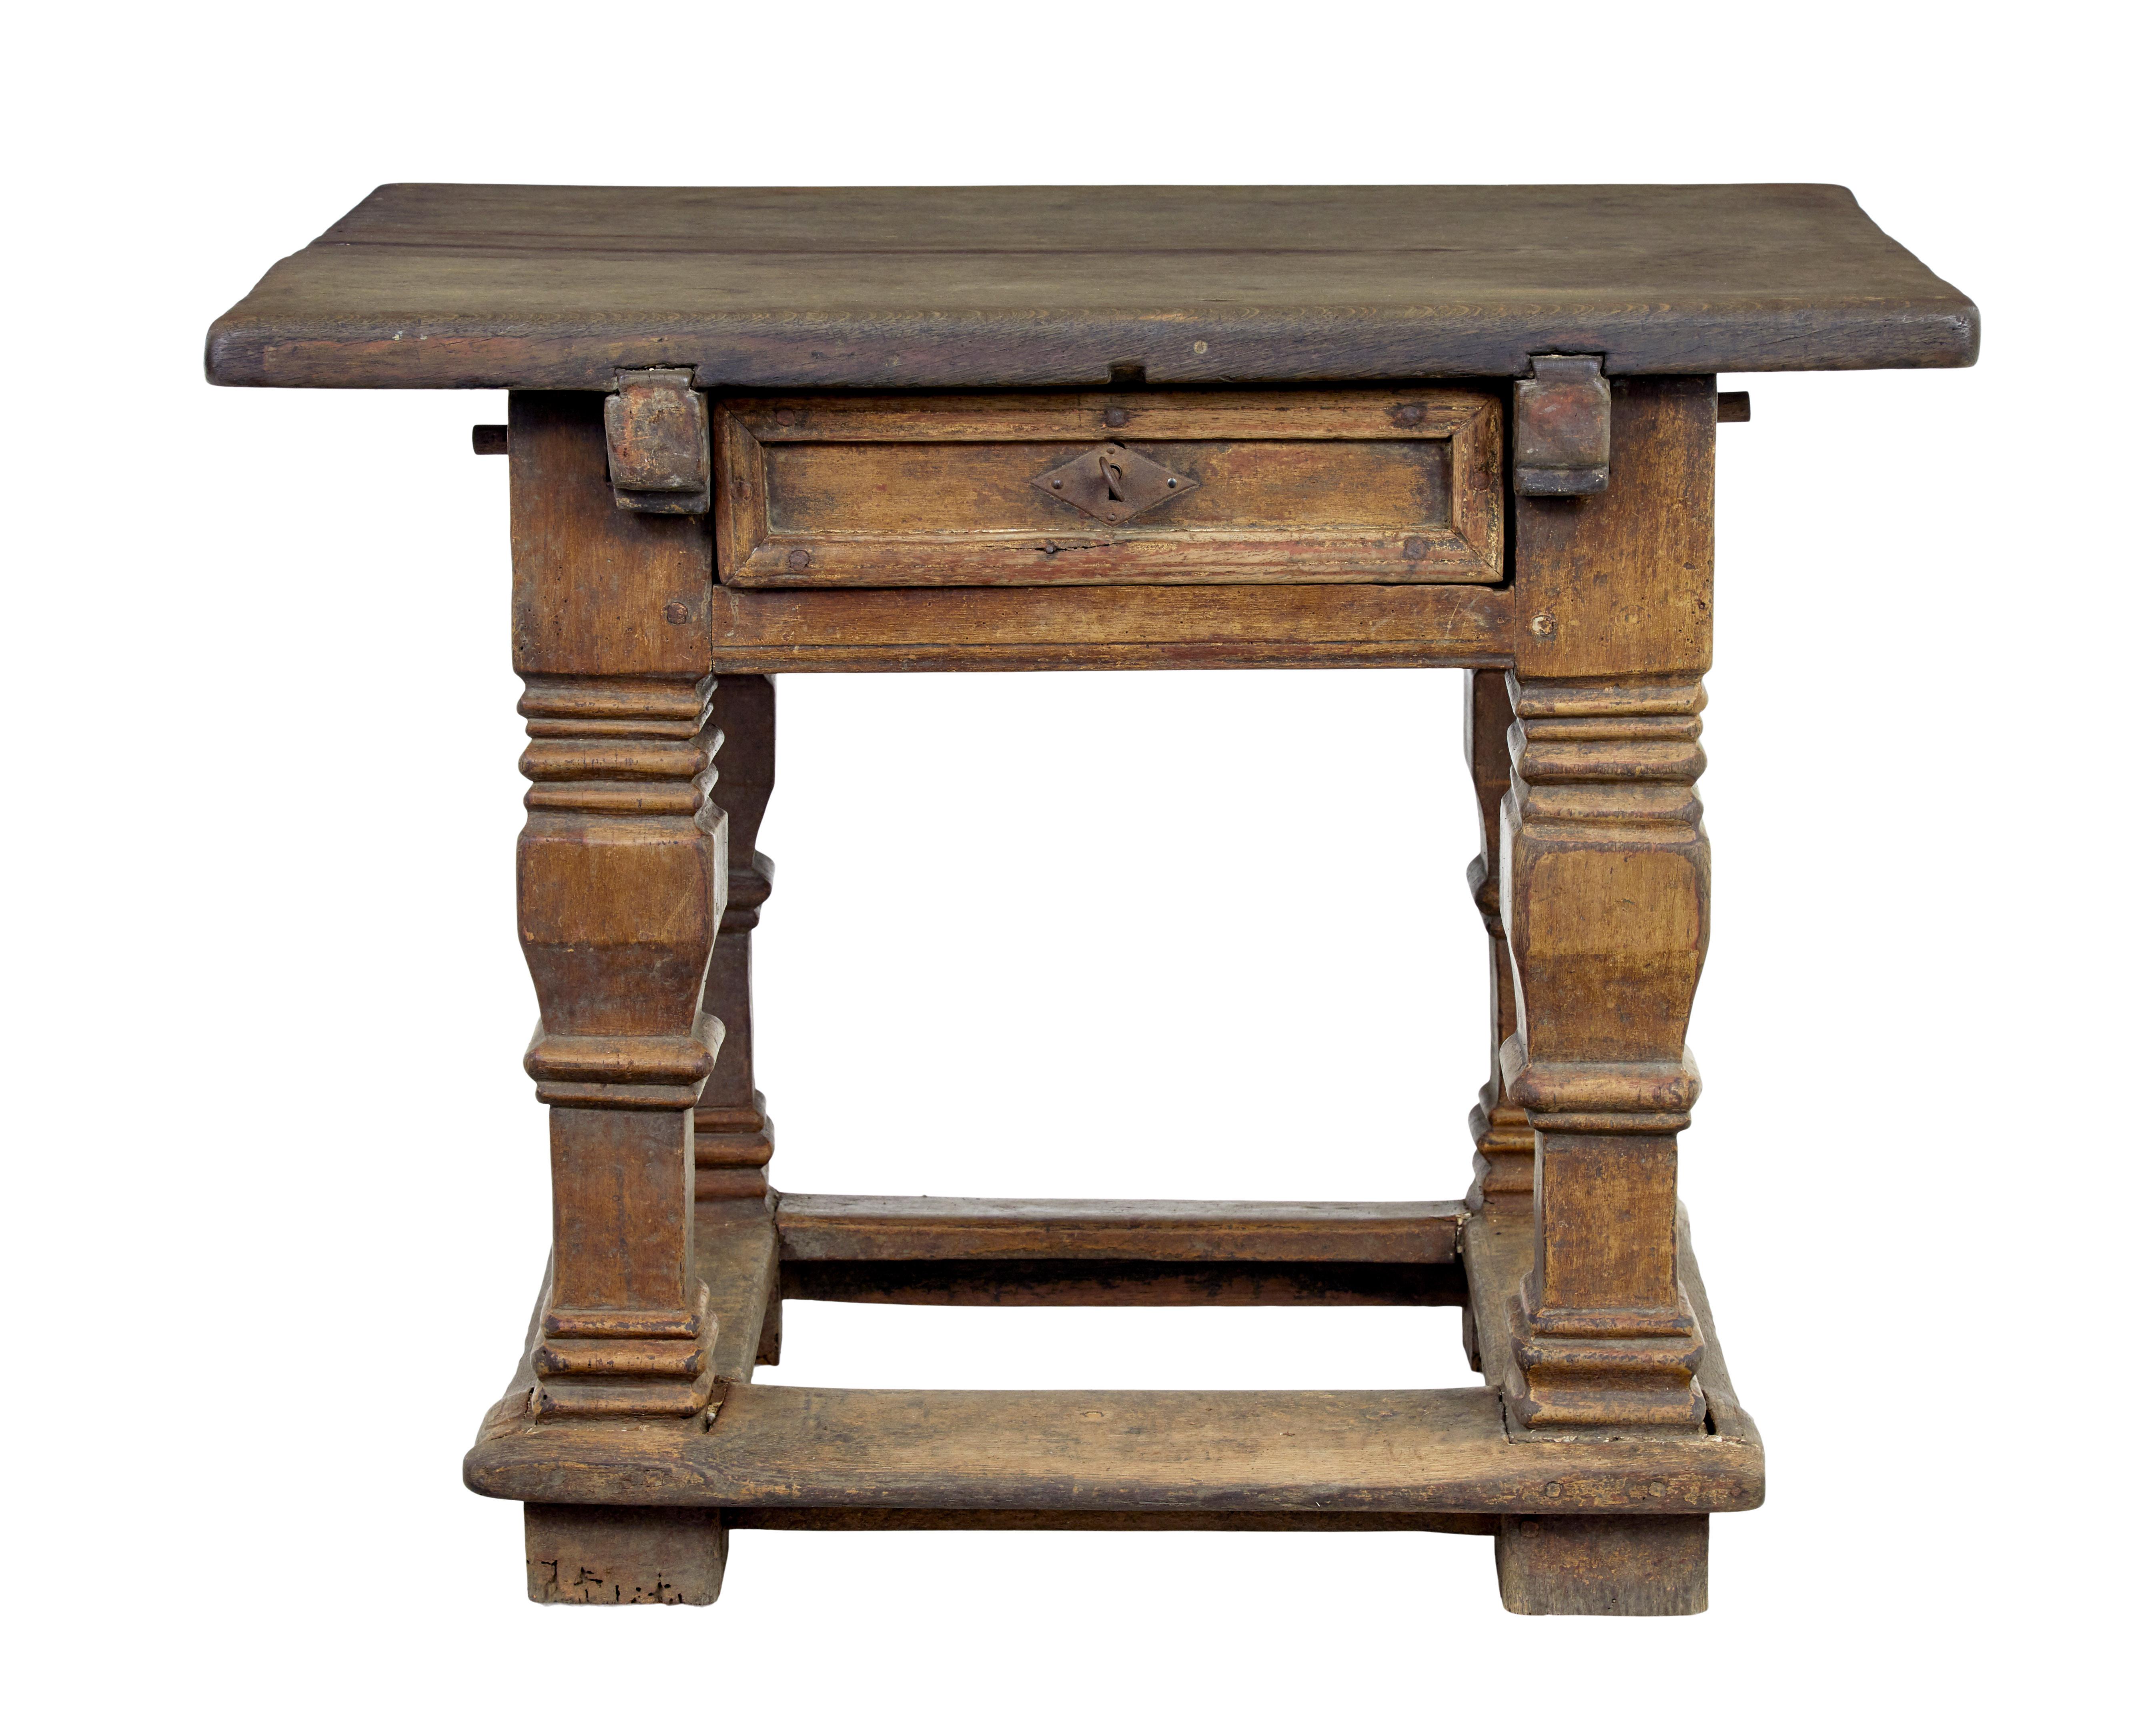 Flemish 17th Century carved oak table For Sale 1